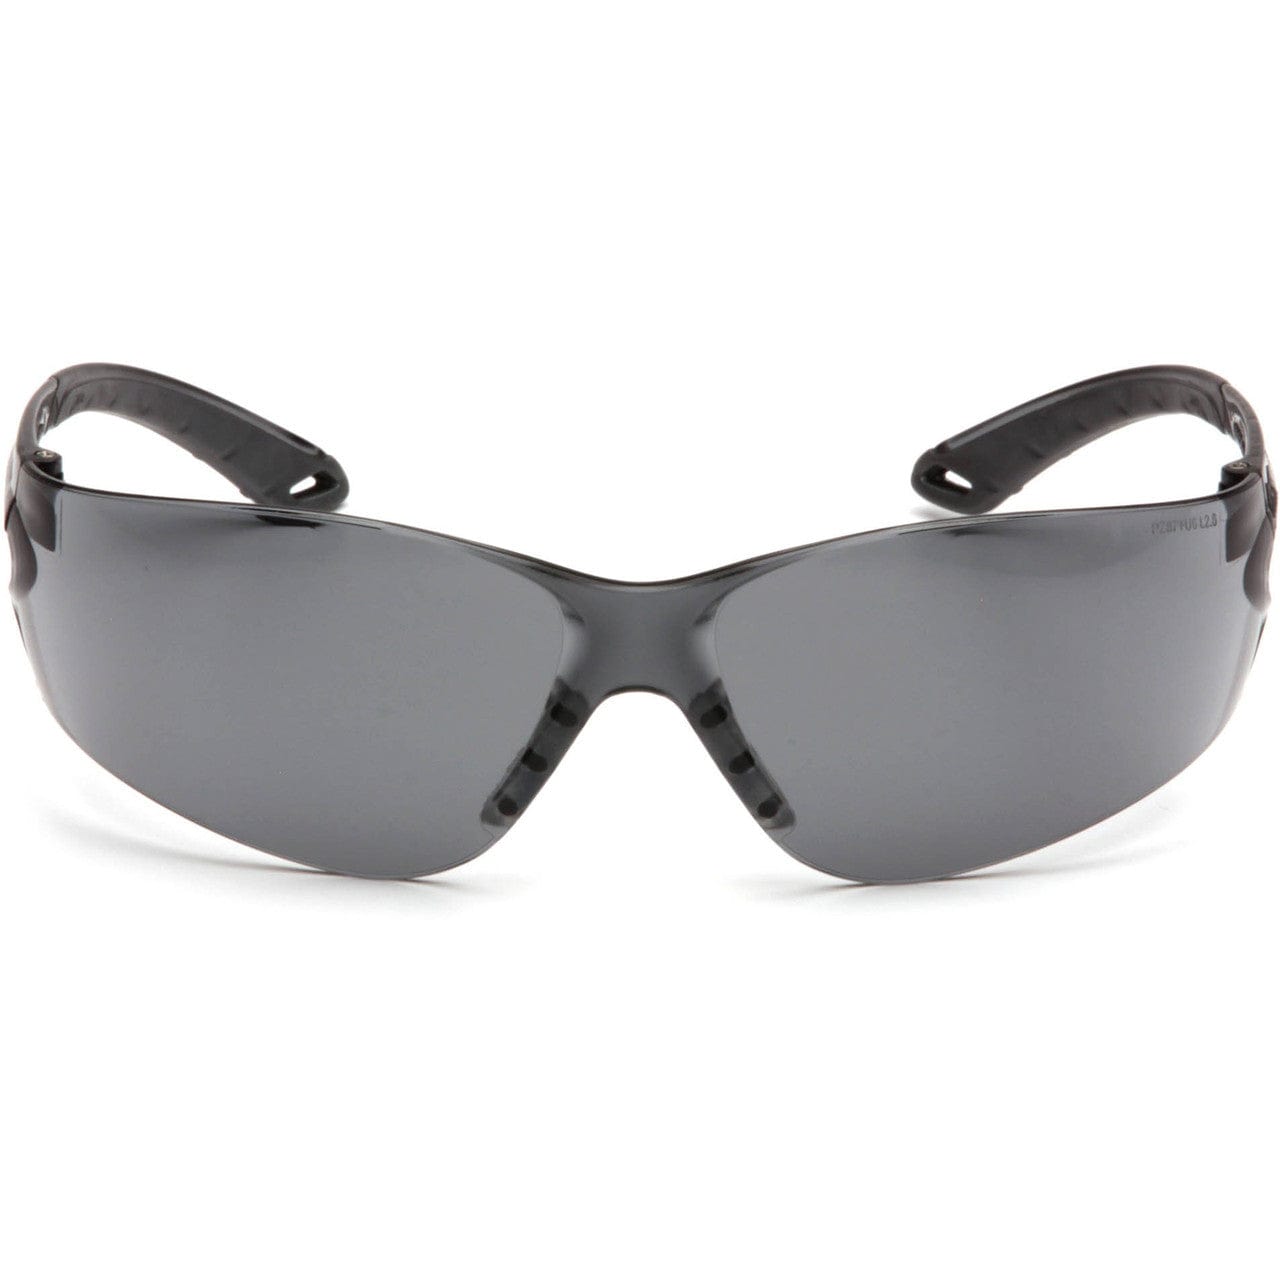 Pyramex Itek Safety Glasses with Gray Lens S5820S Front View